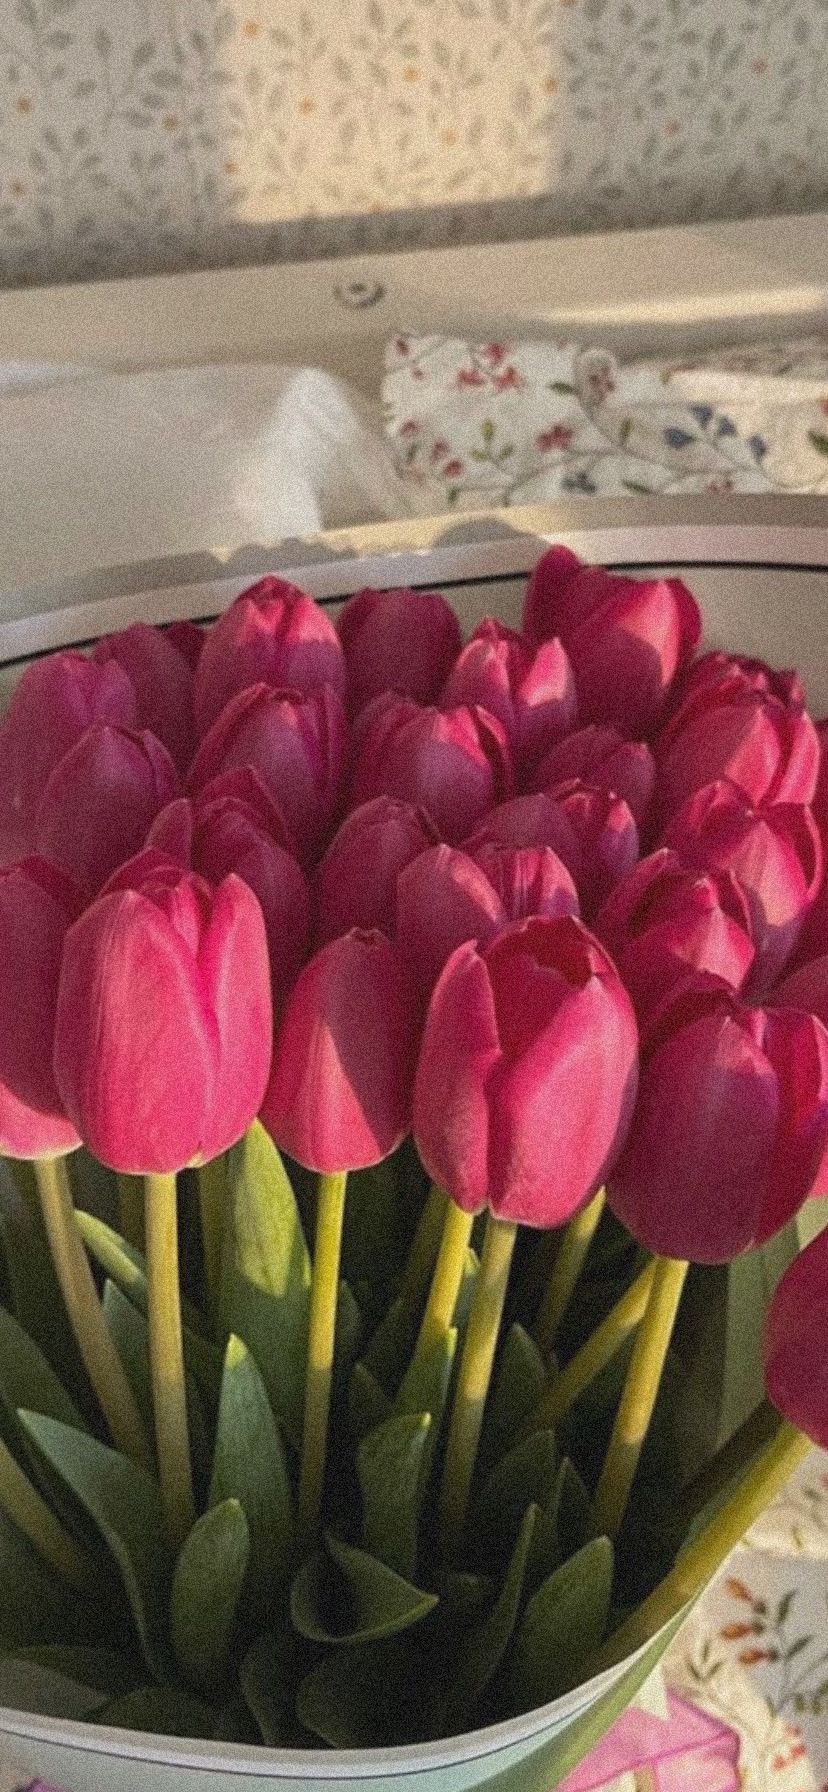 A vase of pink flowers sitting on top - Spring, tulip